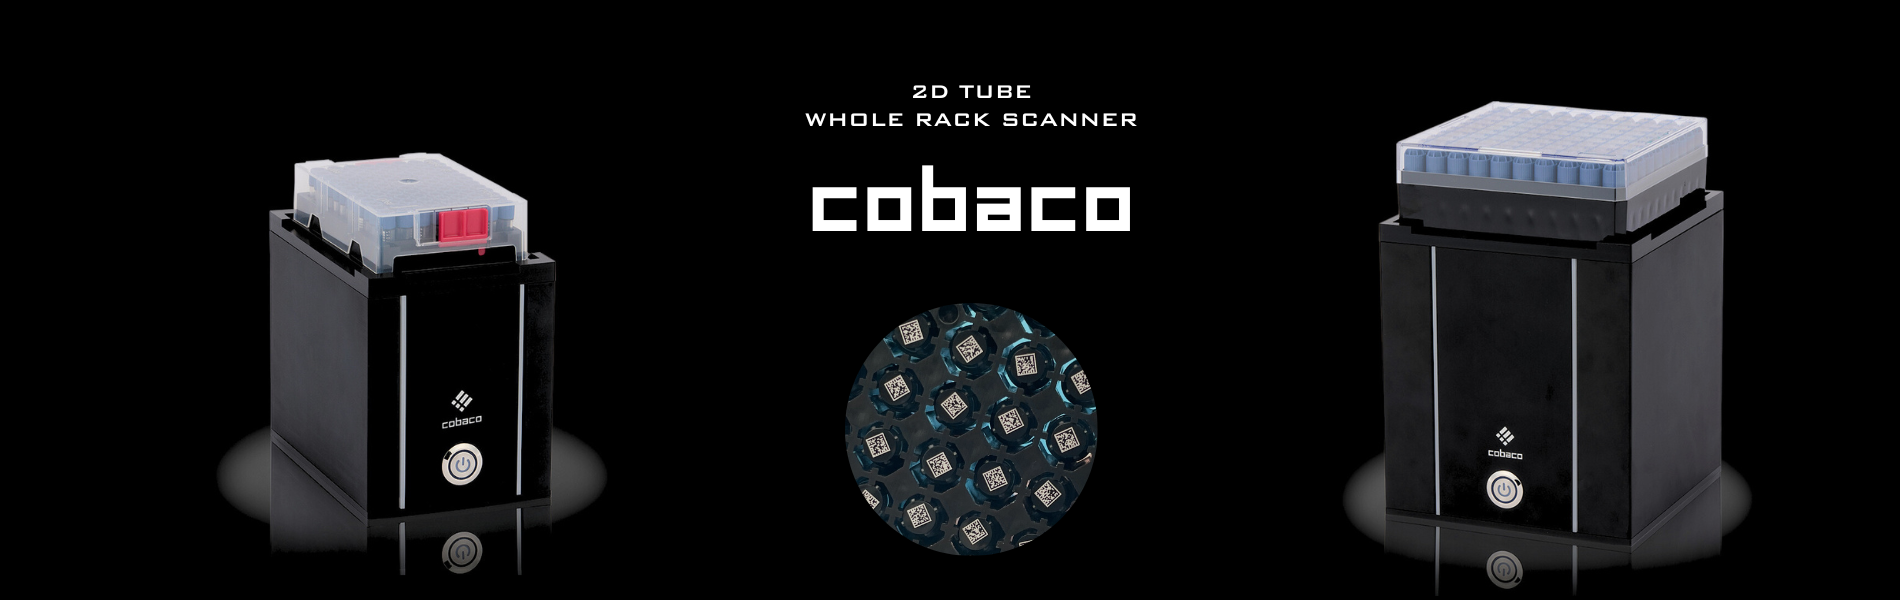 cobaco, whole rack 2D scanner